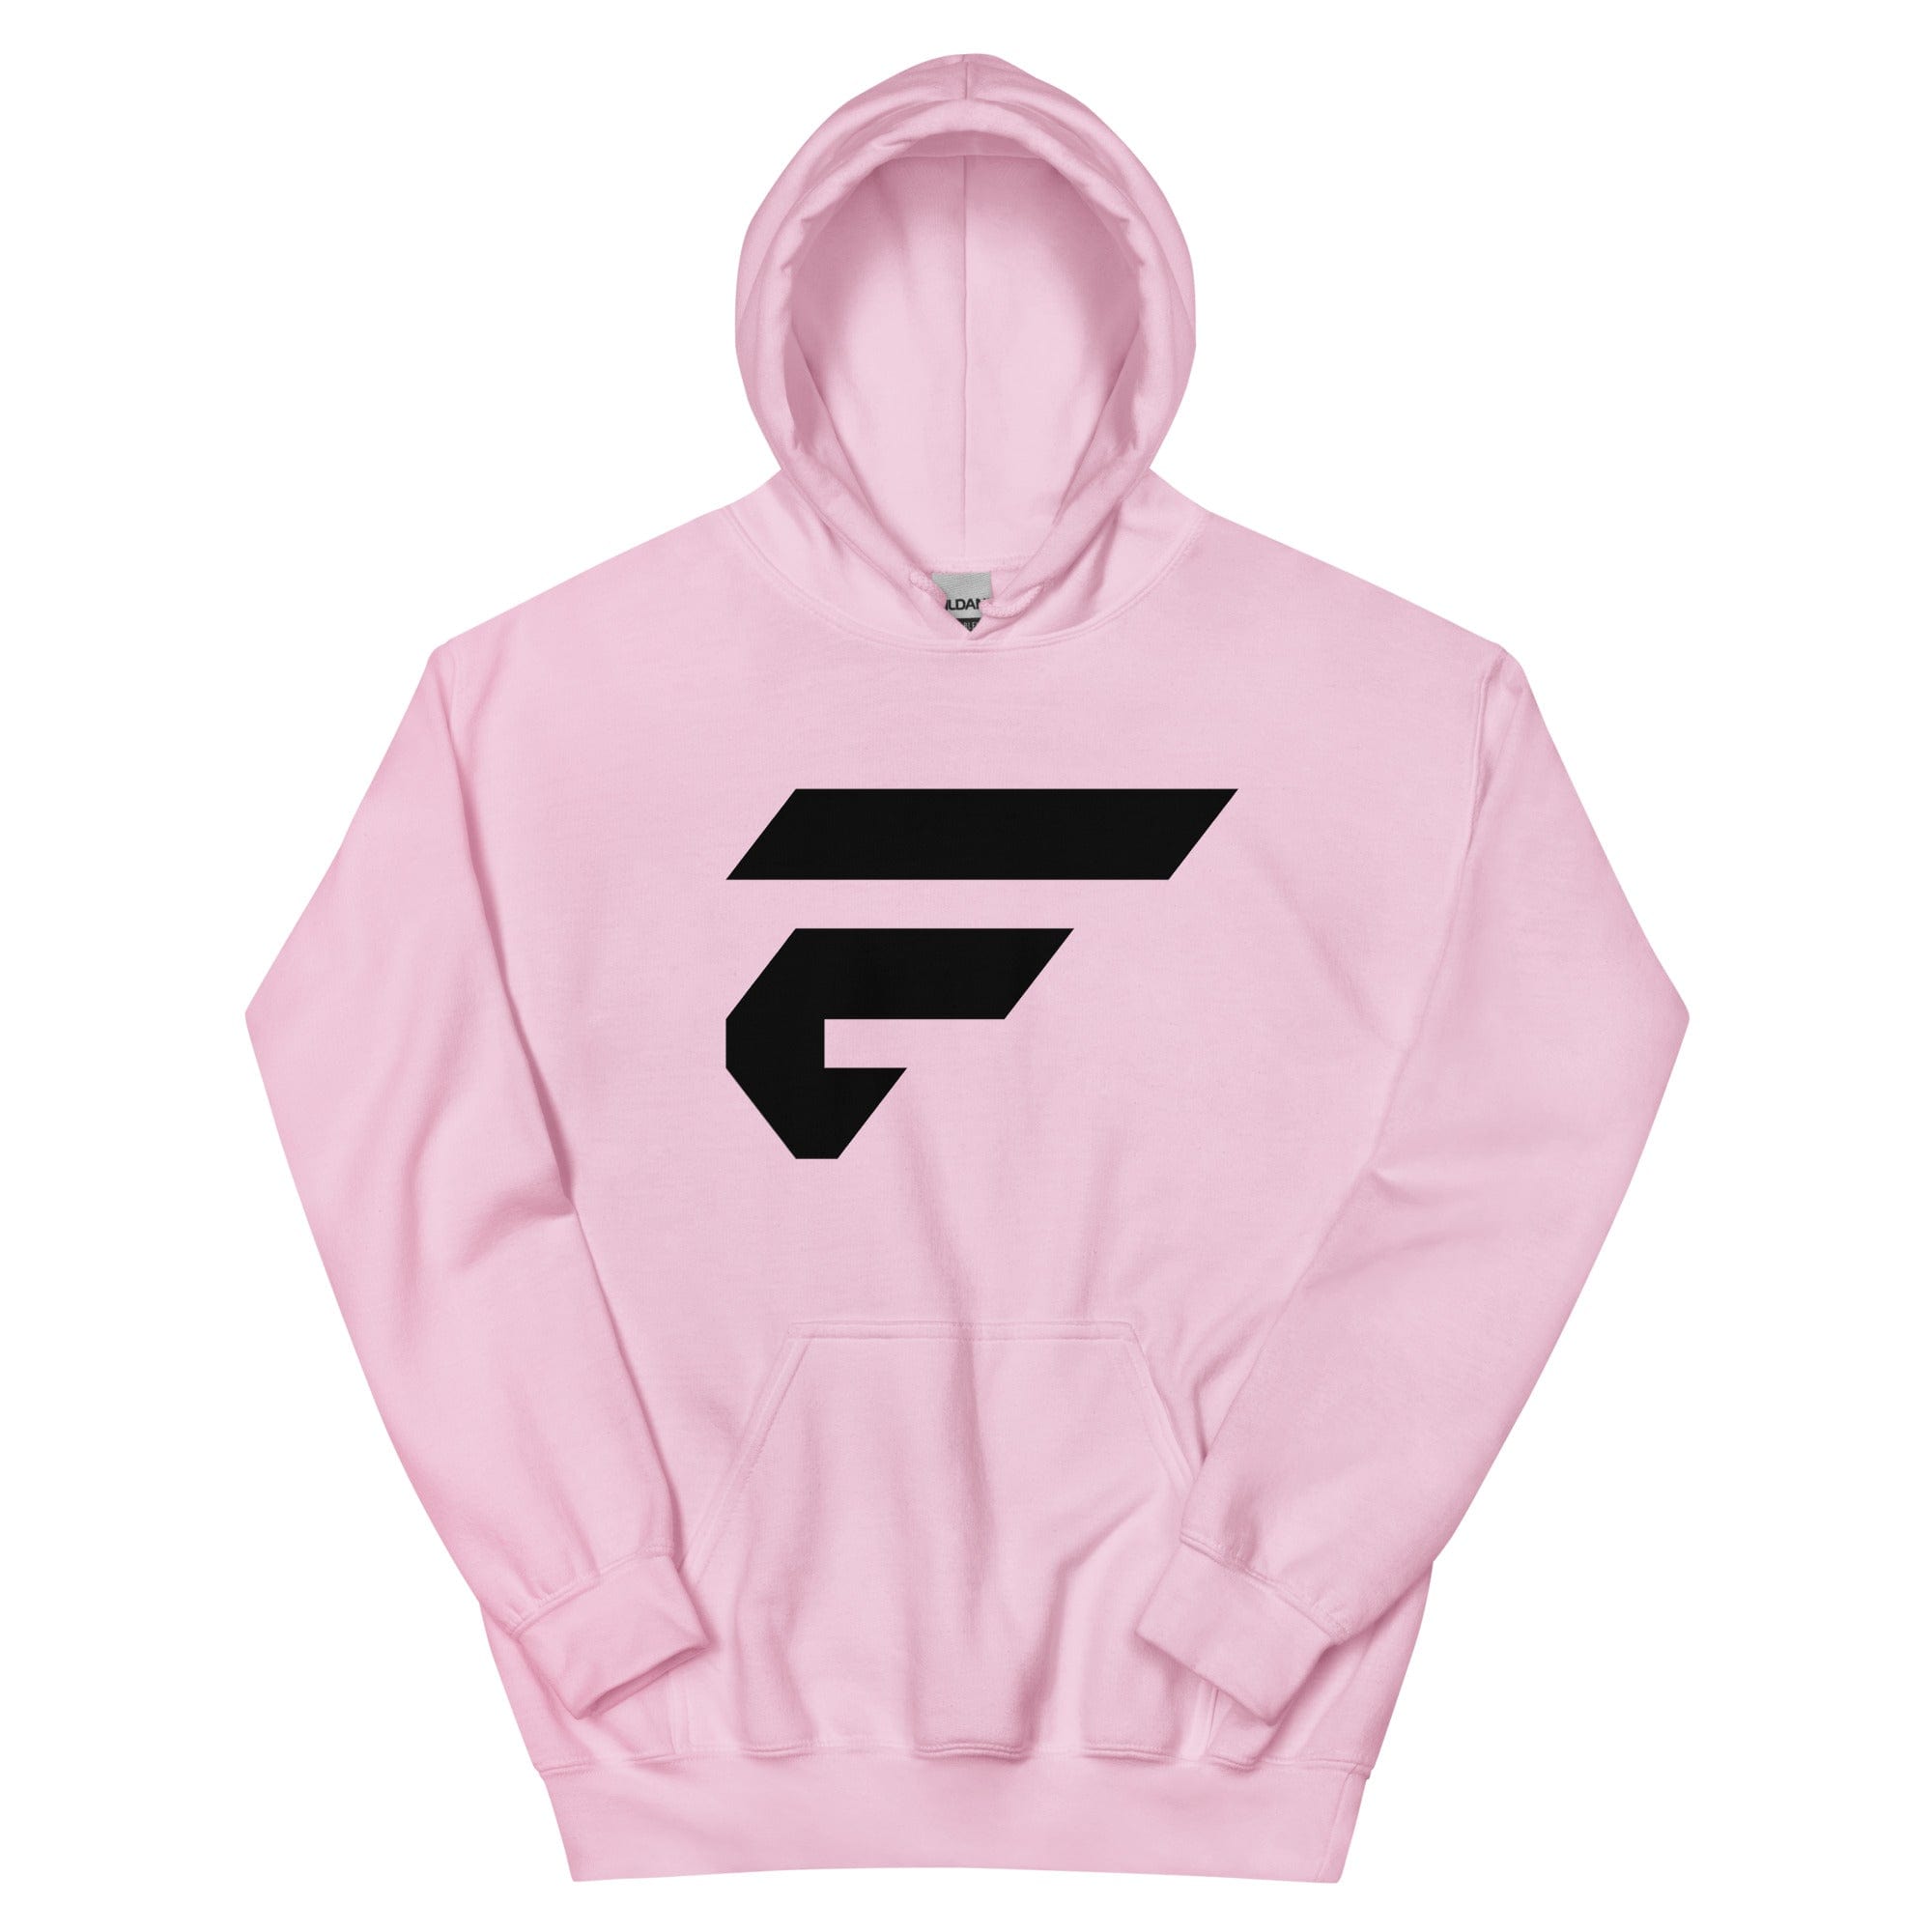 Pink unisex cotton hoodie with Fire Cornhole F logo in black